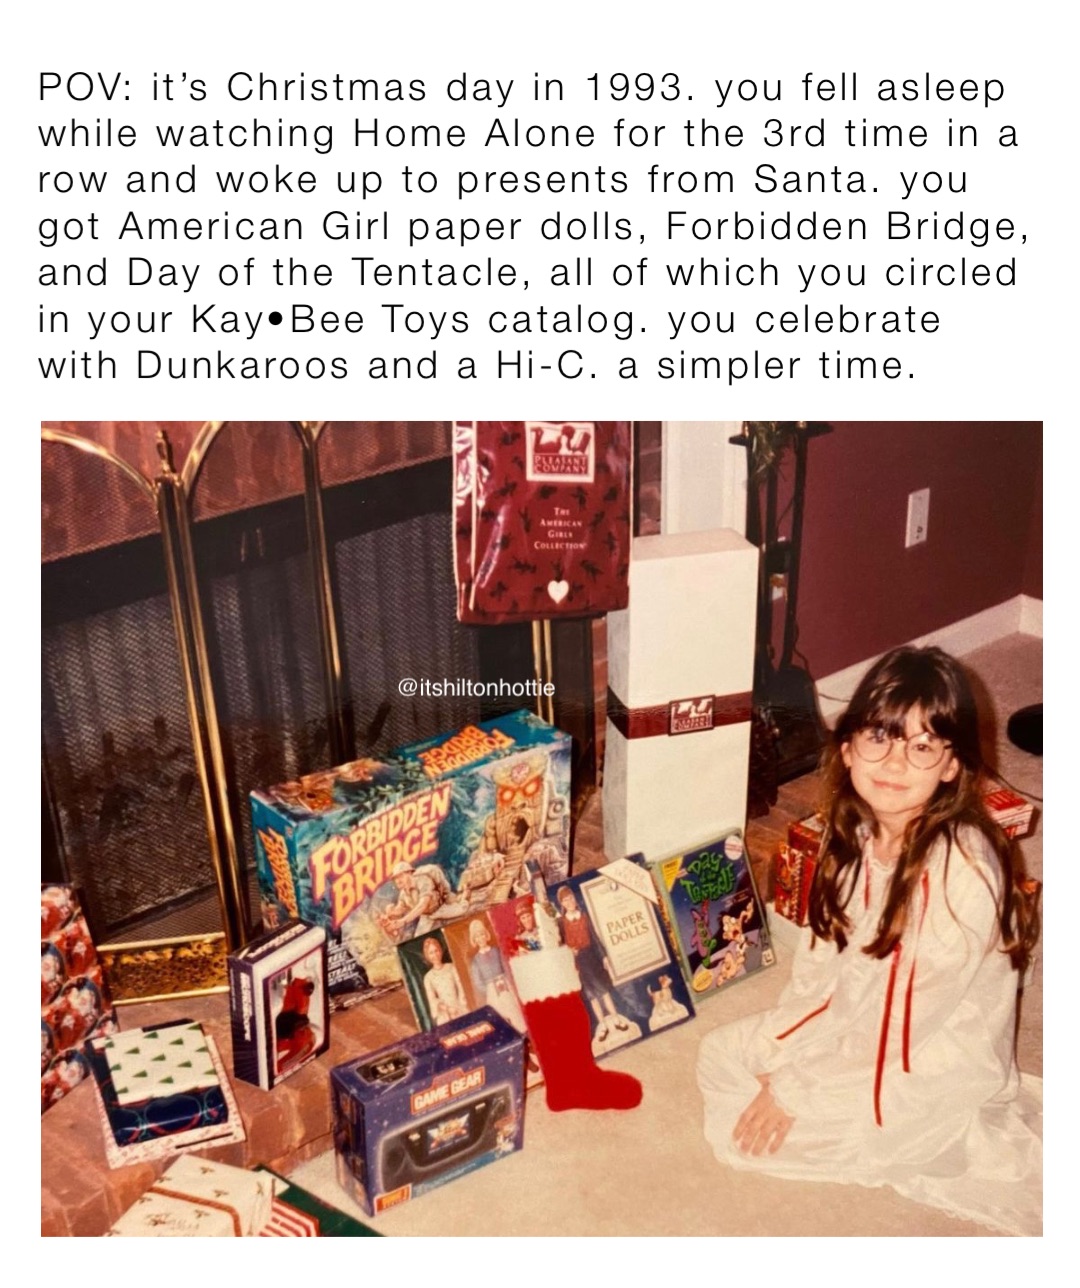 POV: it’s Christmas day in 1993. you fell asleep while watching Home Alone for the 3rd time in a row and woke up to presents from Santa. you got American Girl paper dolls, Forbidden Bridge, and Day of the Tentacle, all of which you circled in your Kay•Bee Toys catalog. you celebrate with Dunkaroos and a Hi-C. a simpler time.